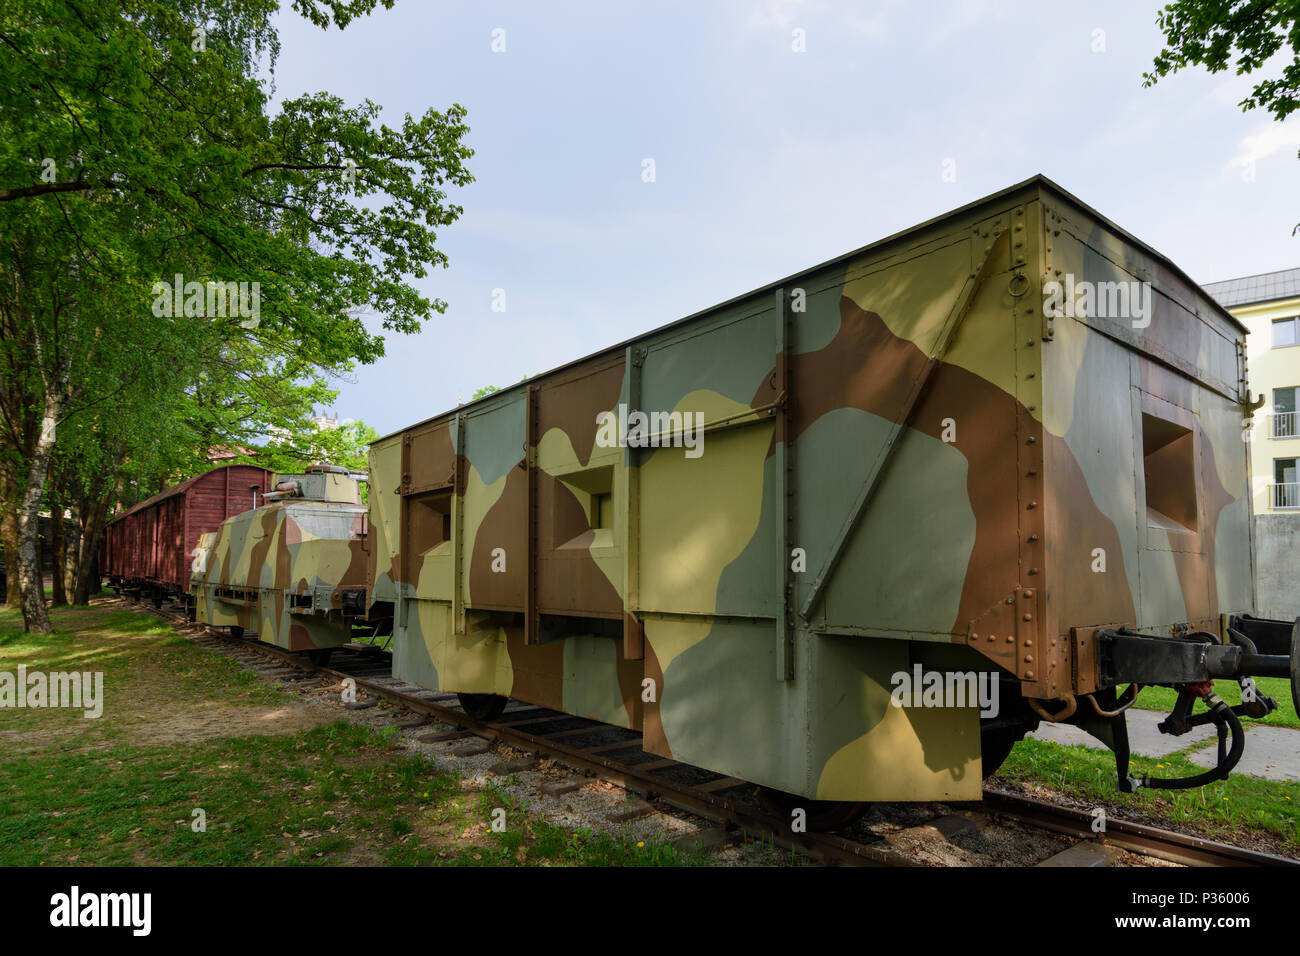 Banska Bystrica (Neusohl): museum at the Memorial of the Slovak National Uprising, open-air exhibition of World War II armored train in Slovakia, , Stock Photo